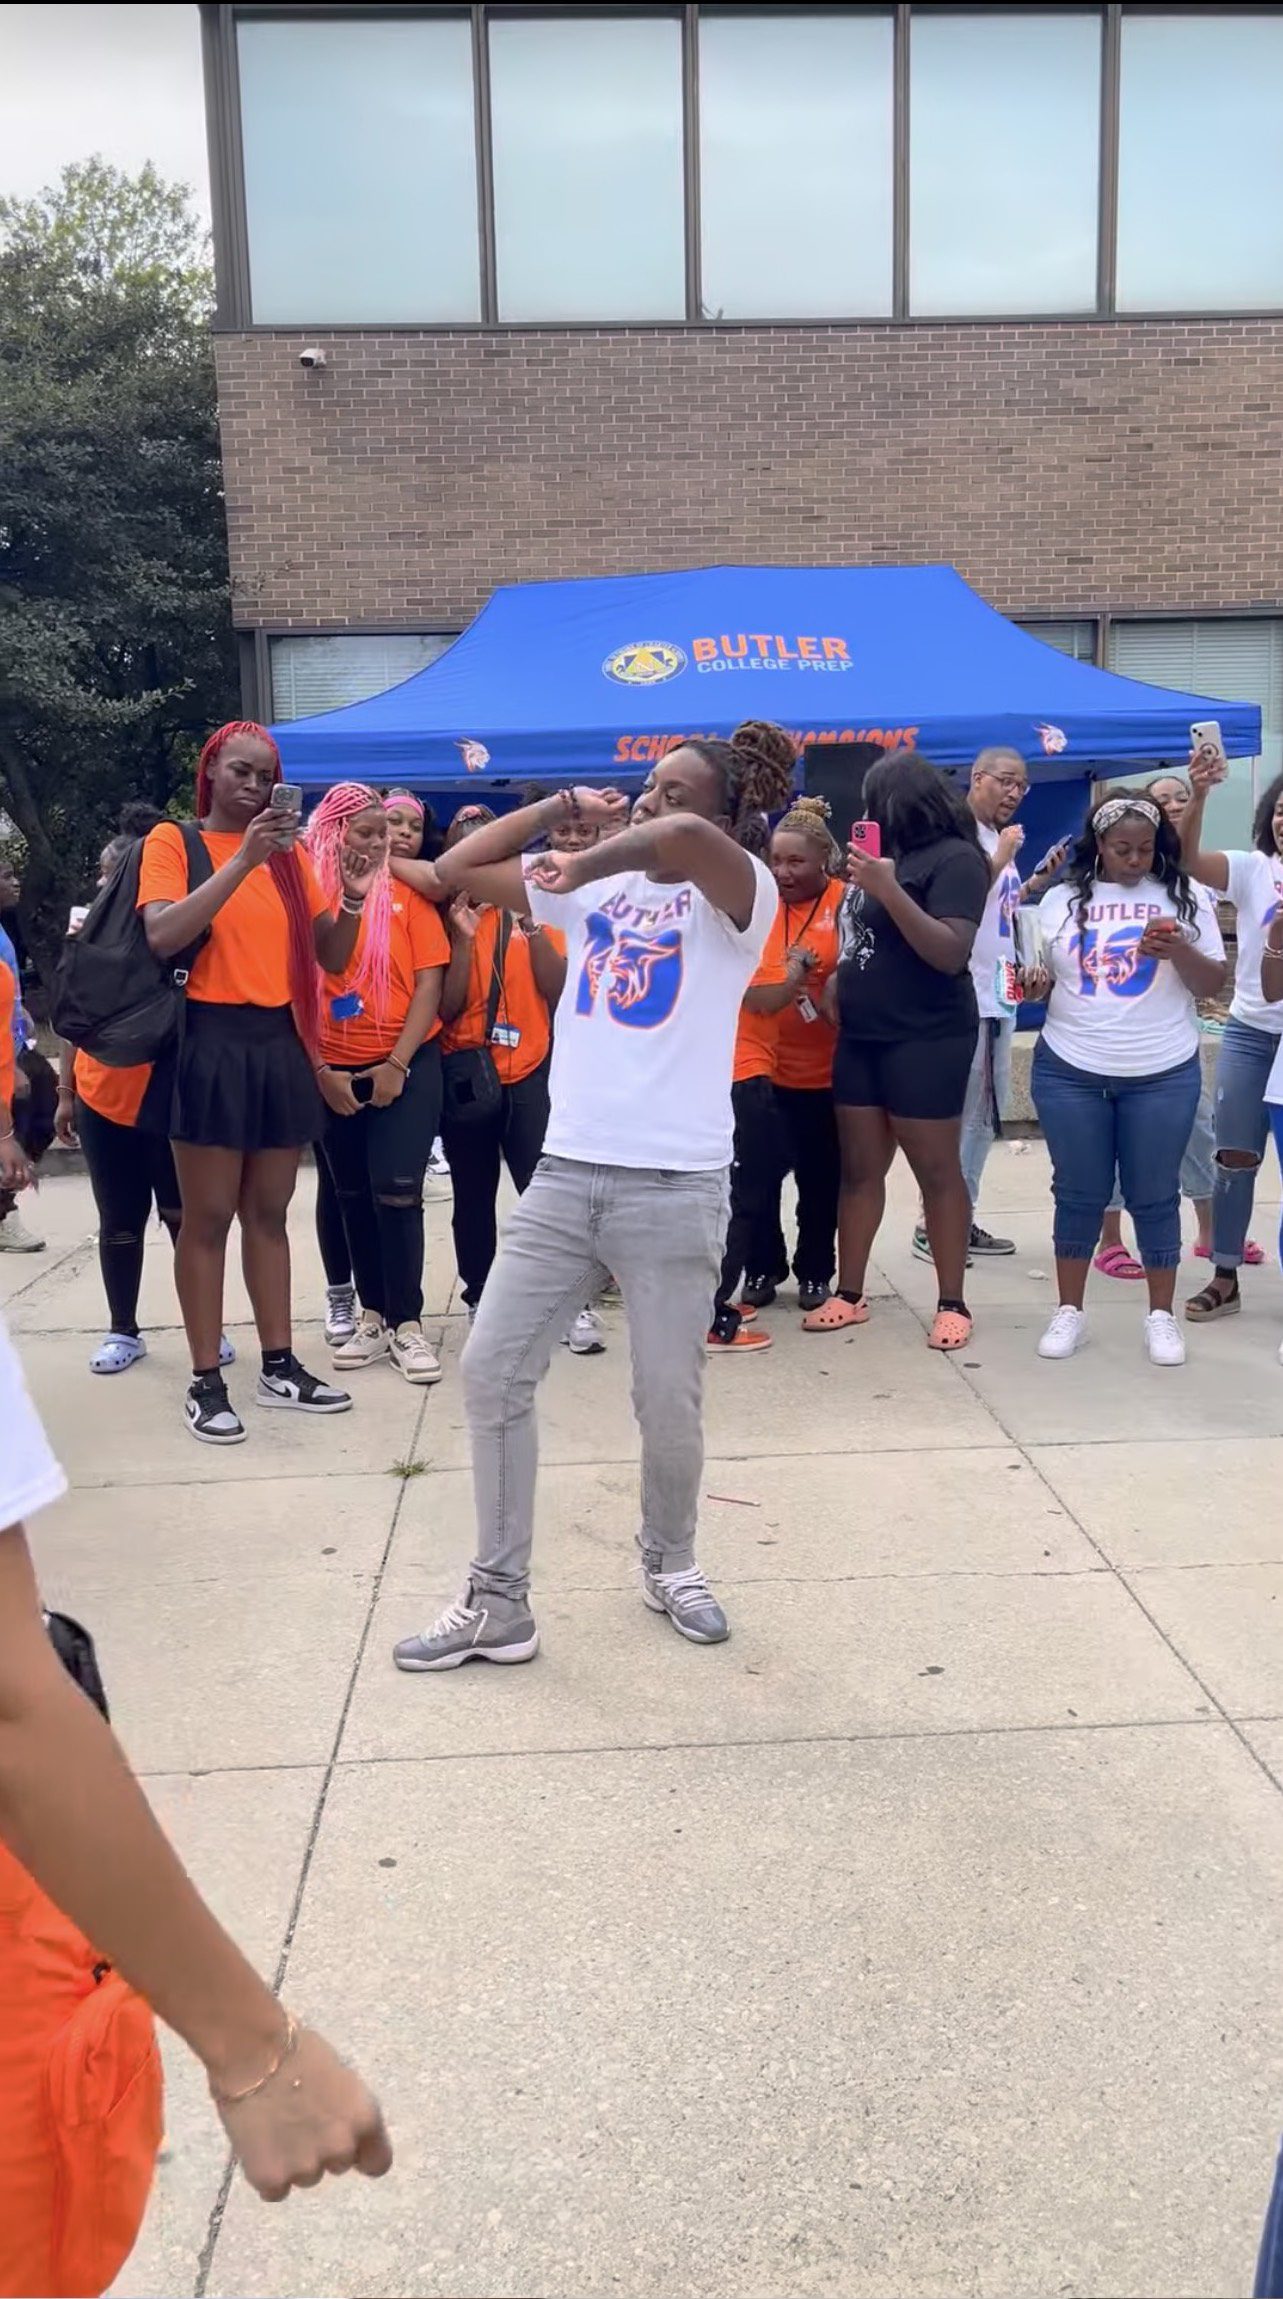 Benton dances outside, surrounded by Butler students and staff. She has her arms crossed in front of her face as she leans back. She's wearing a white Butler t-shirt and gray jeans and has her locs up in a bun.